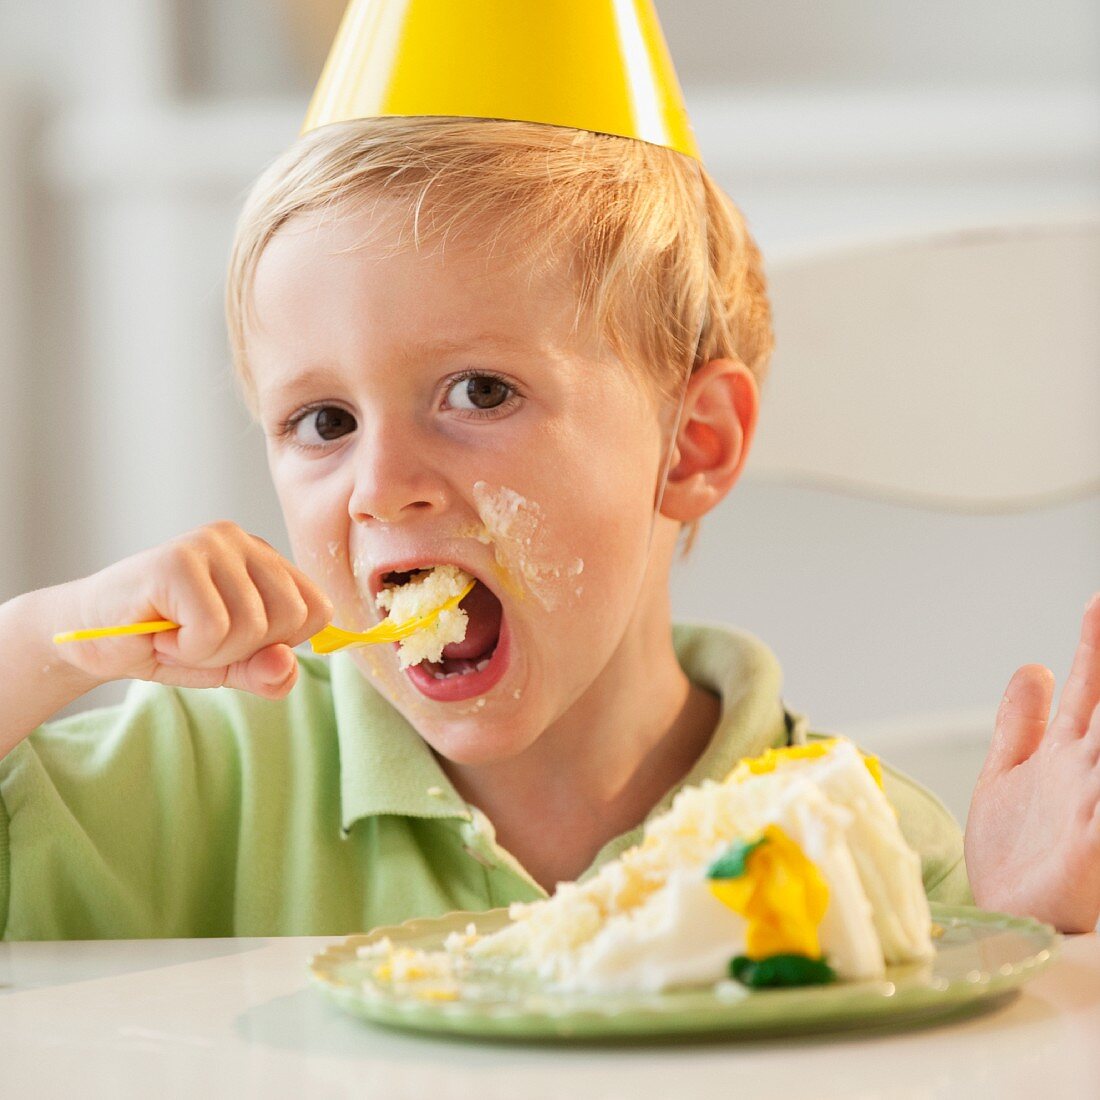 Young child eating birthday cake